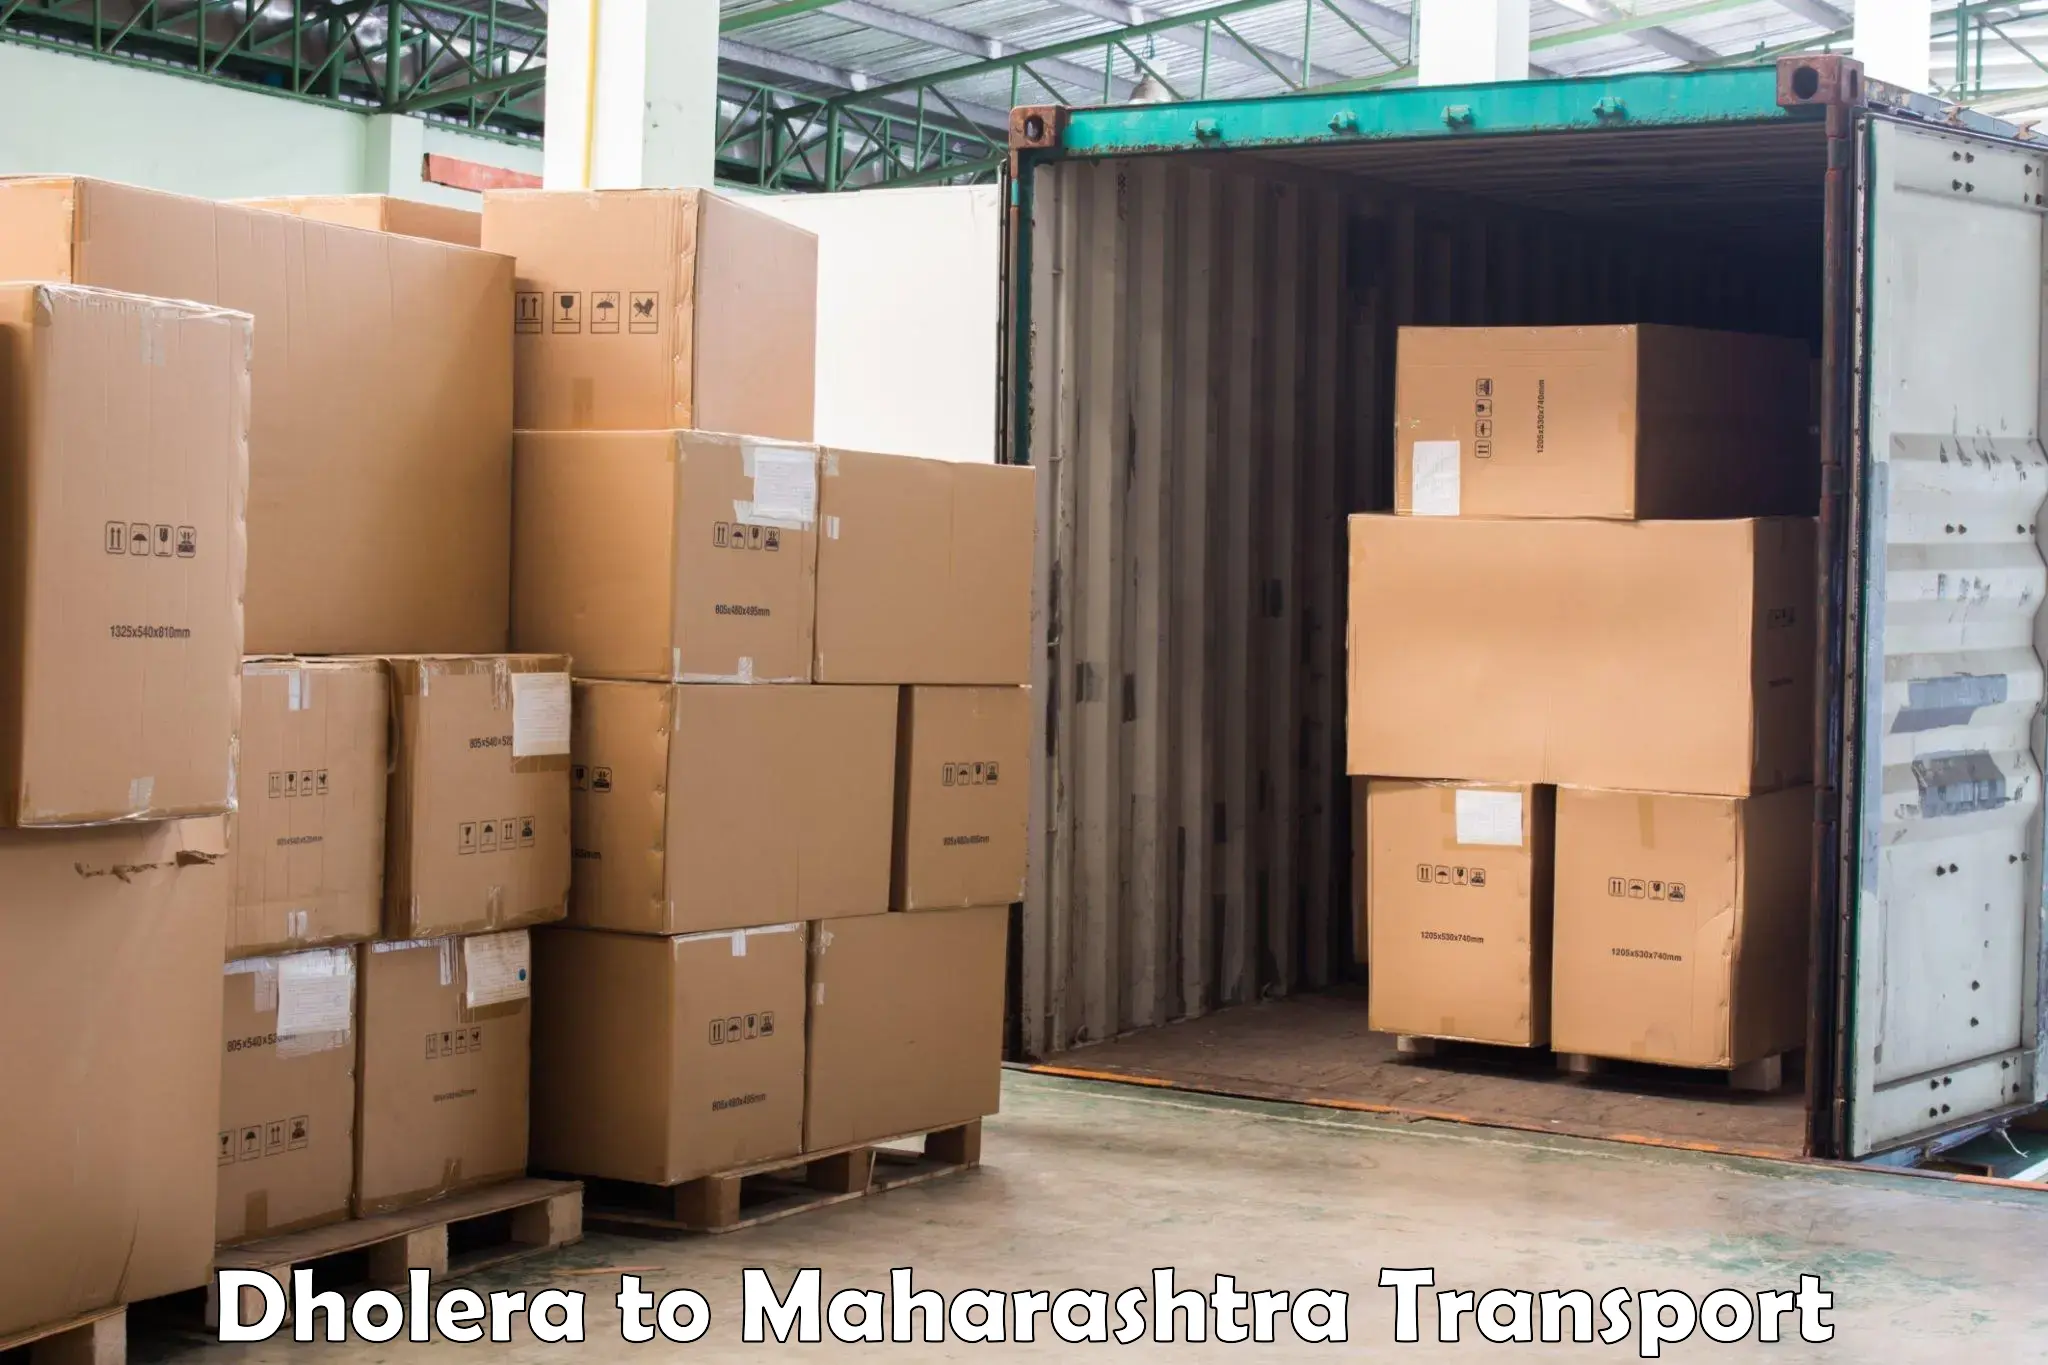 Transport bike from one state to another Dholera to Maharashtra